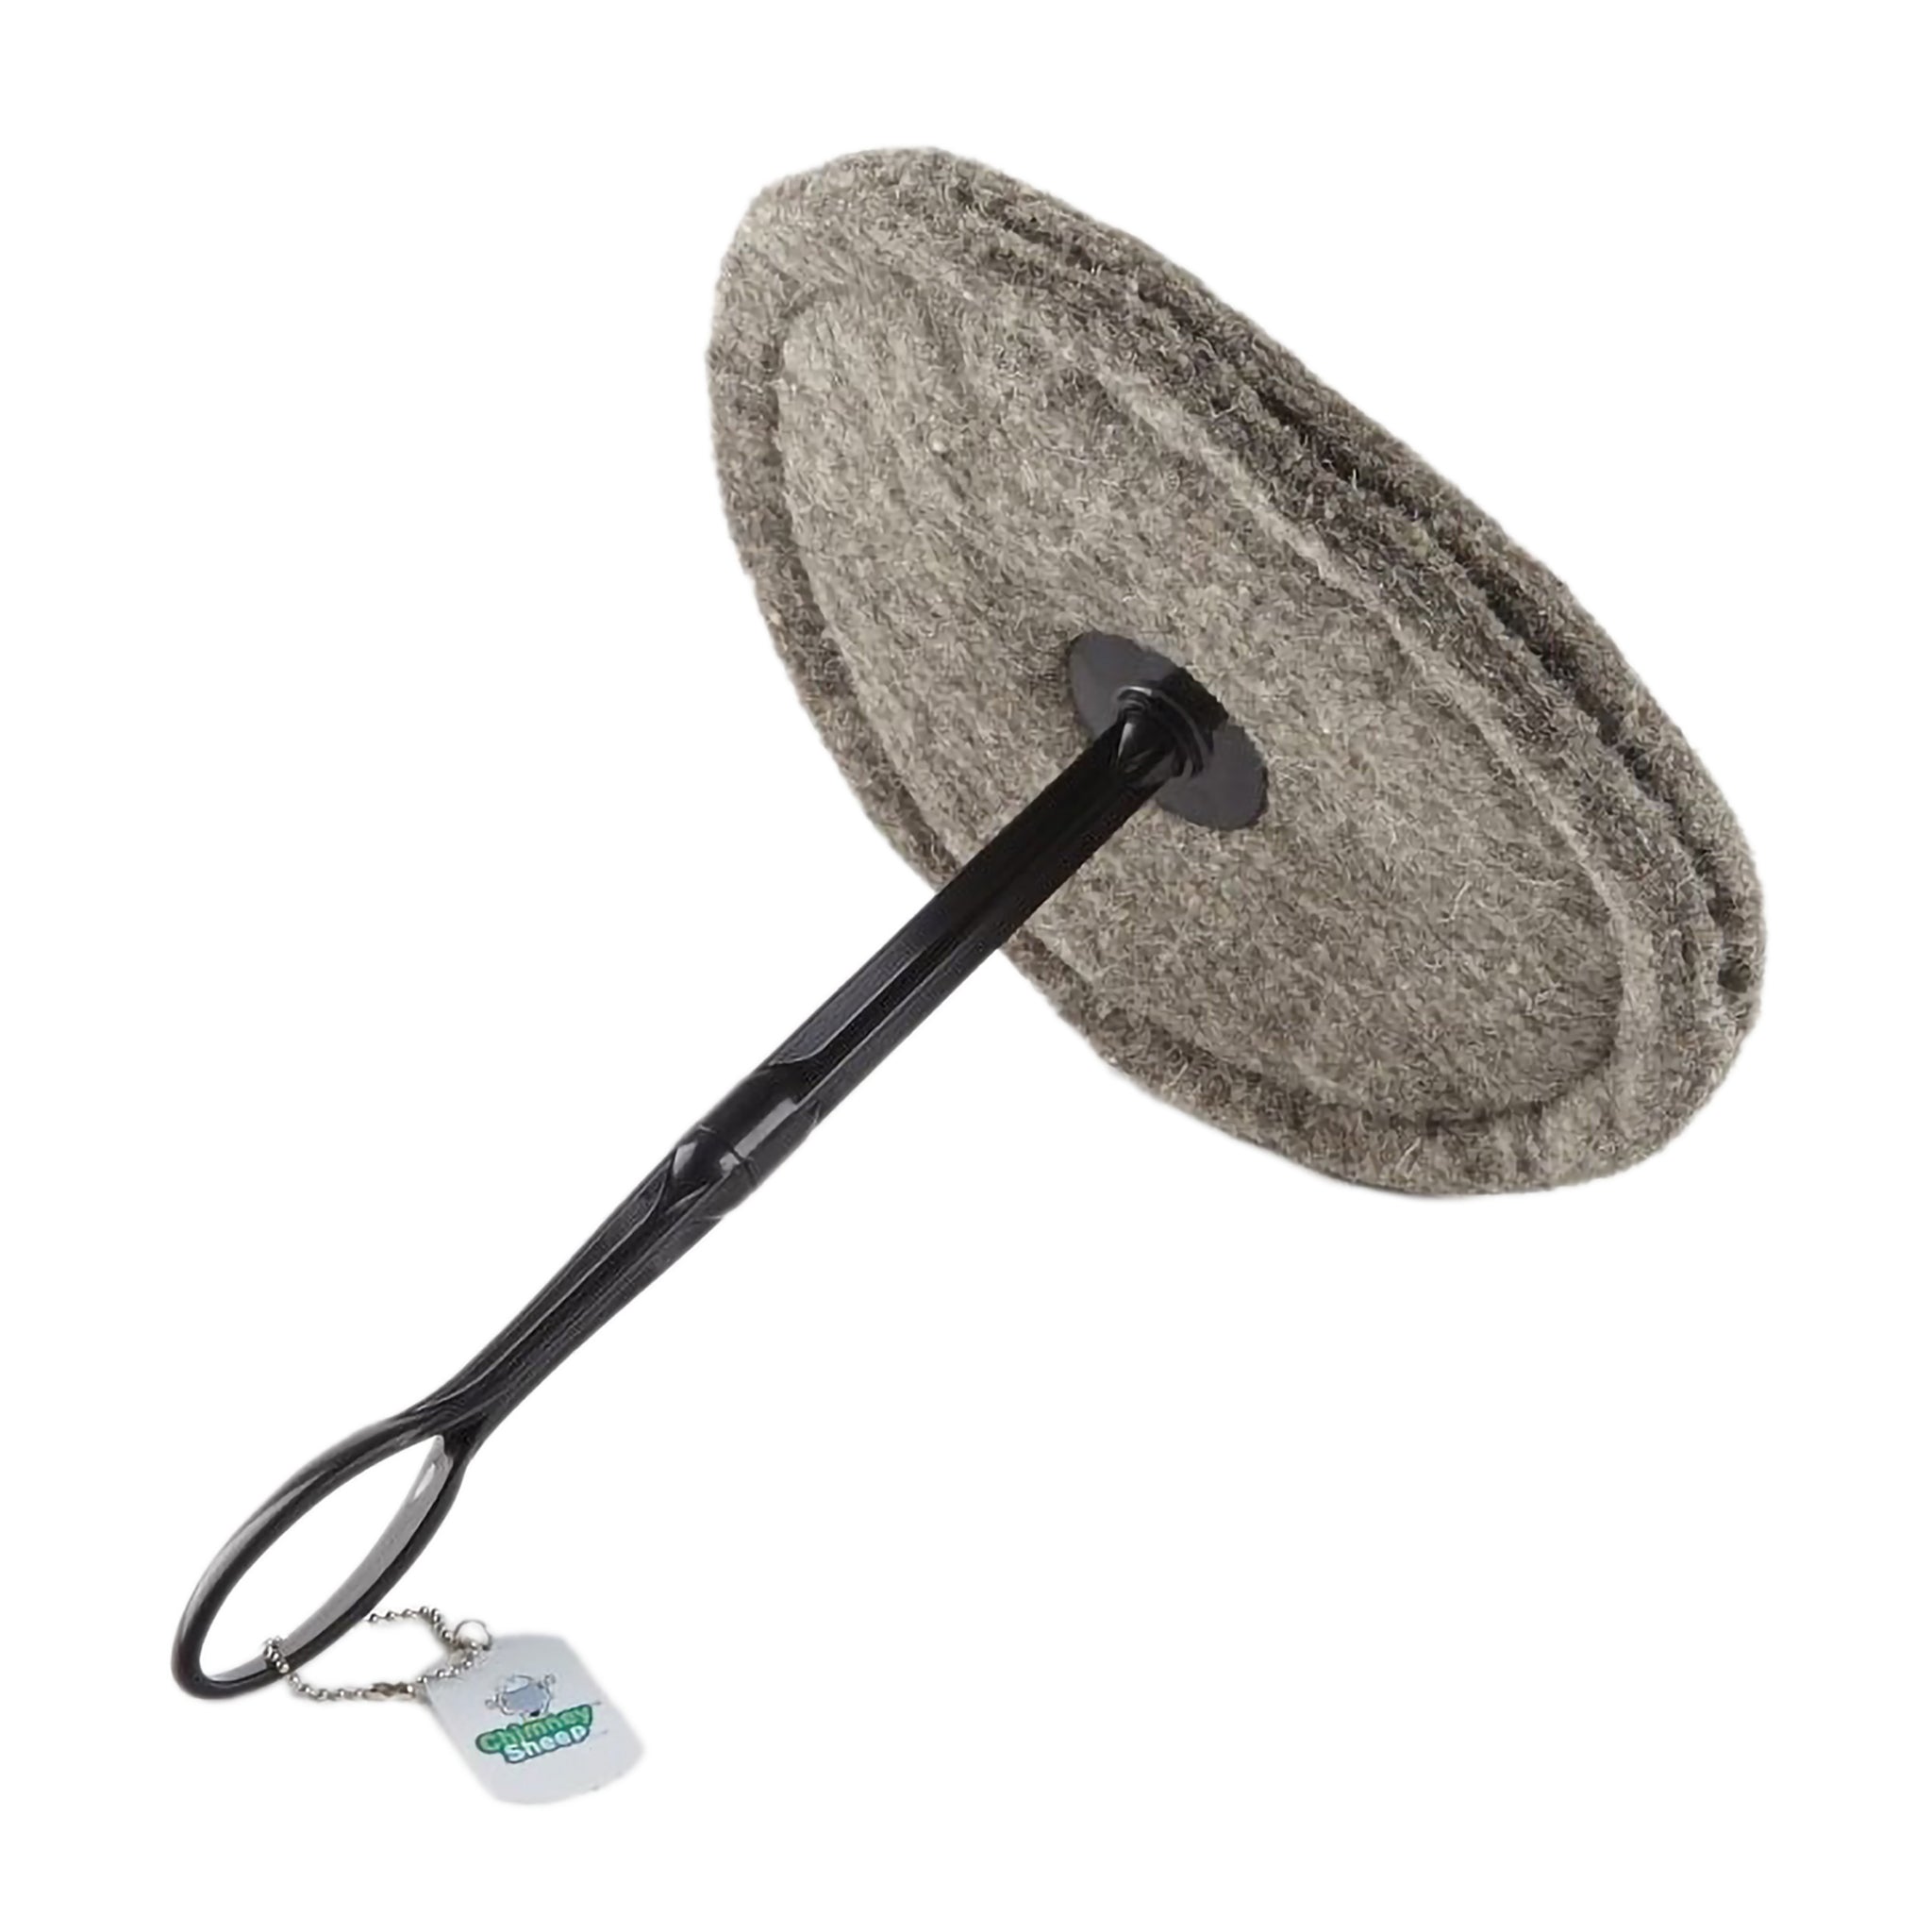 Round wool chimney draught excluder with extended handle.